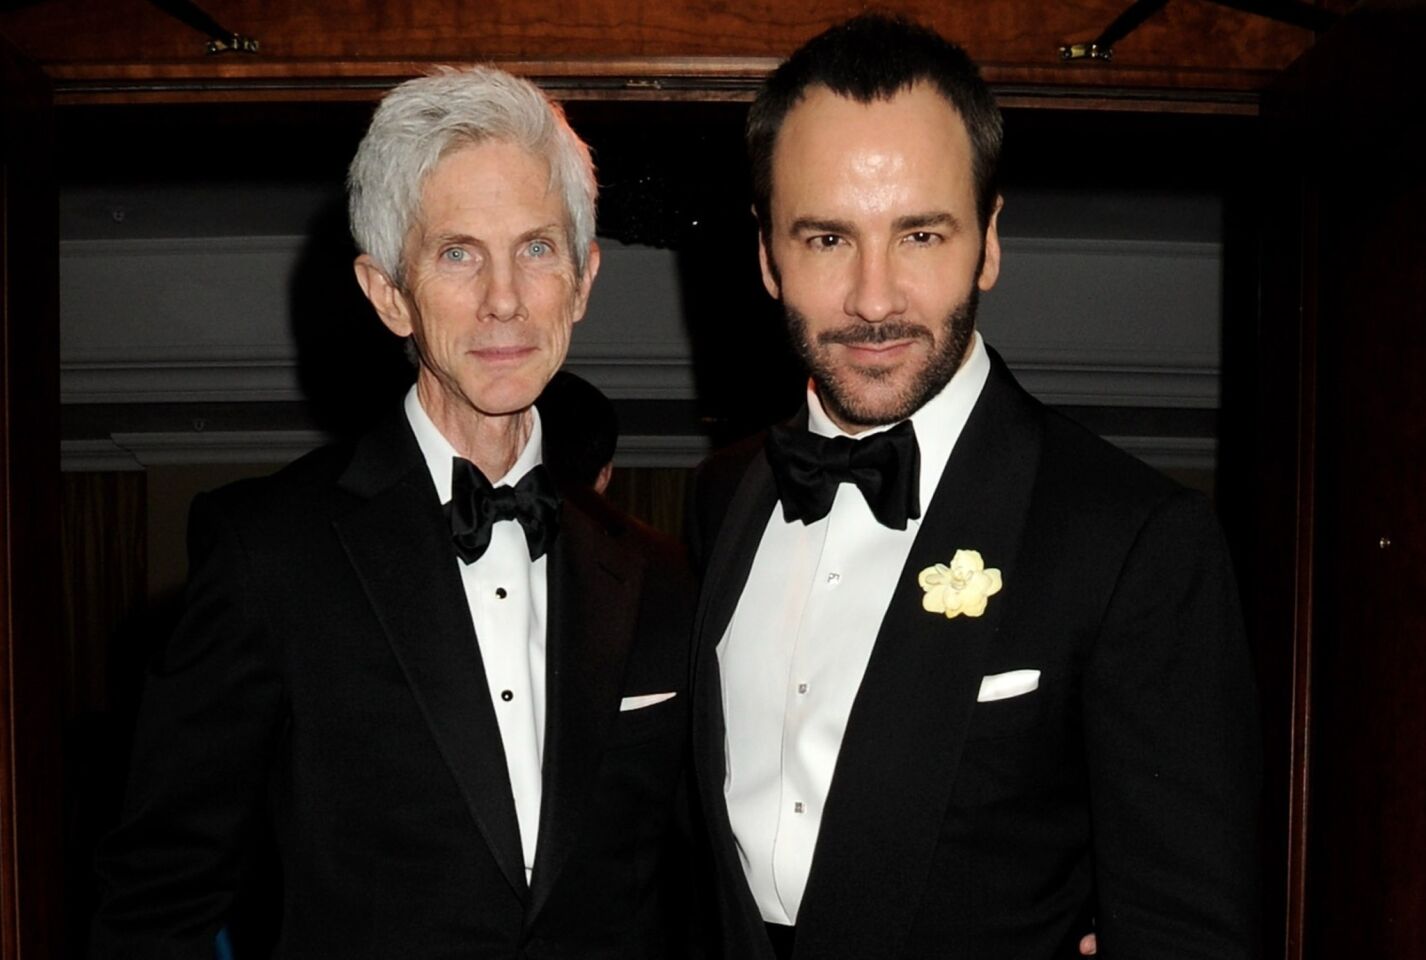 Designer Tom Ford, right, and his longtime partner, Richard Buckley, revealed in early April that they had tied the knot. "We are now married, which is nice," the 52-year-old told Vogue at an event in London. "I know that was just made legal in the U.K., which is great; we were married in the States." Buckley, 66, is a journalist who was formerly editor in chief of Vogue Hommes International. The pair have been together for 27 years after first meeting at a 1986 fashion show when Ford was 25. They also have a son together named Alexander John Buckley Ford, born in September 2012.